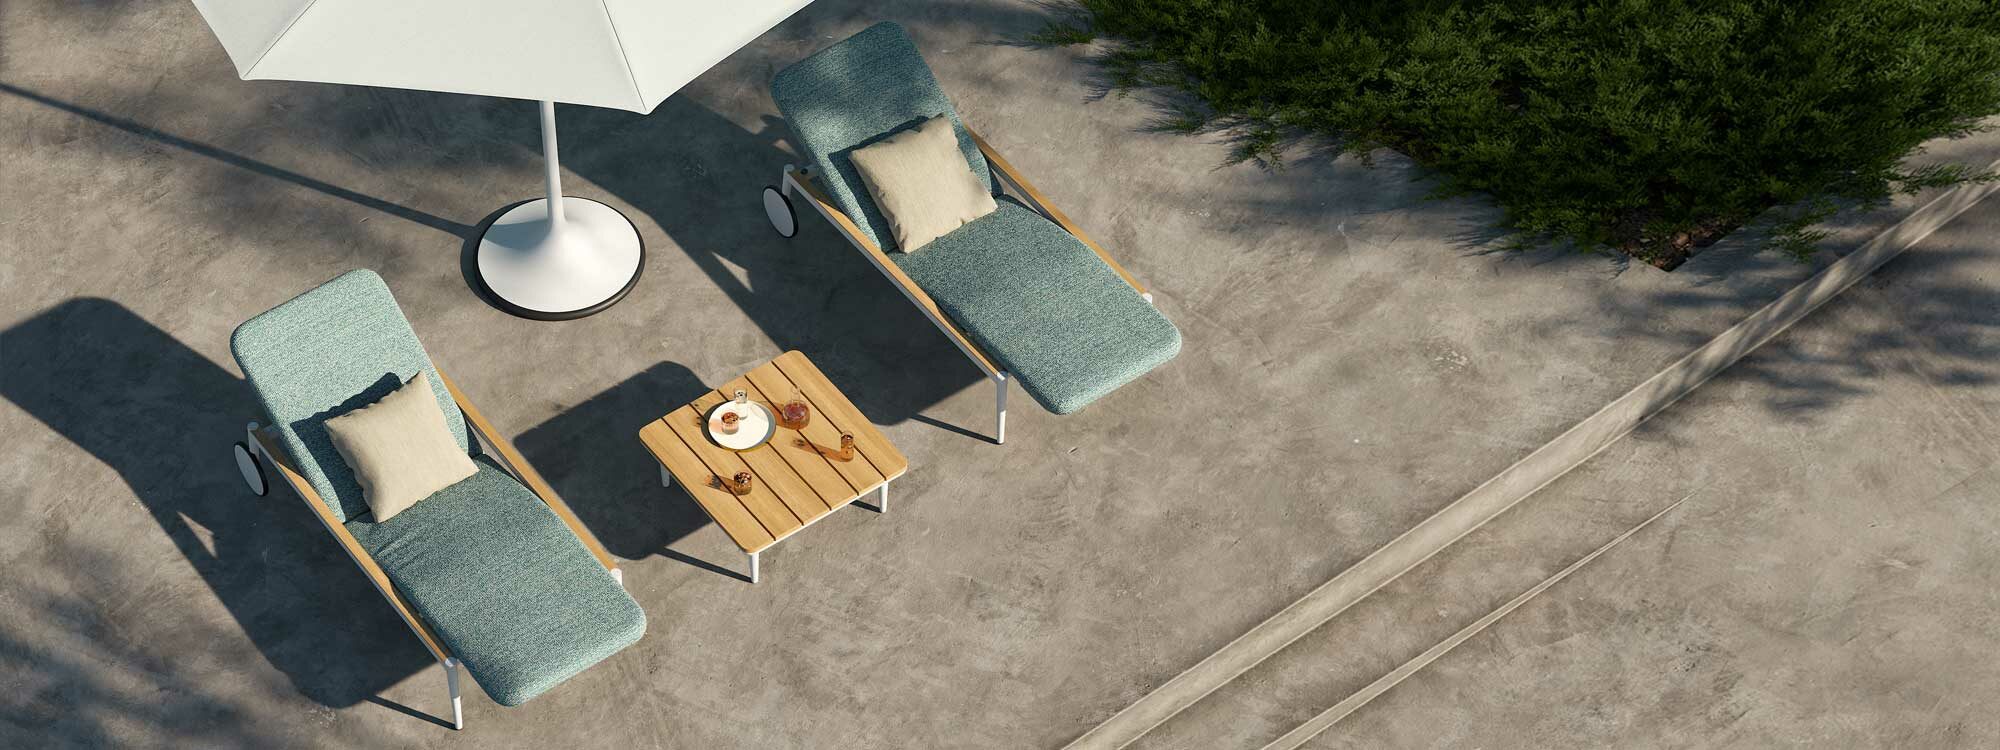 Image of aerial view of Styletto white sun loungers with blue cushions next to Palma parasol, by Royal Botania